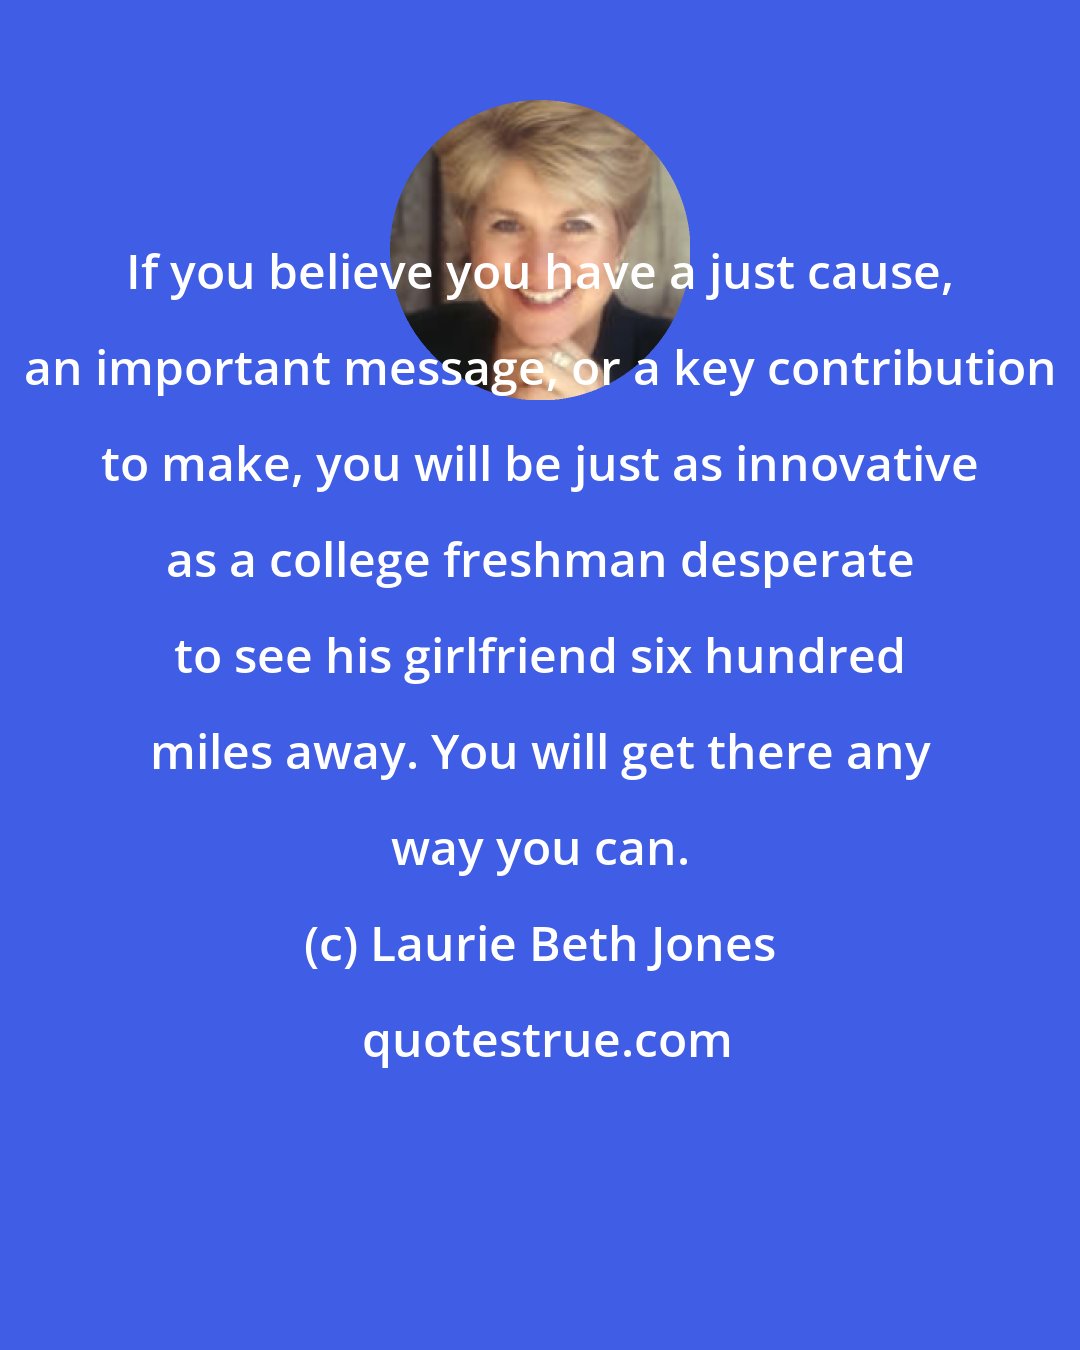 Laurie Beth Jones: If you believe you have a just cause, an important message, or a key contribution to make, you will be just as innovative as a college freshman desperate to see his girlfriend six hundred miles away. You will get there any way you can.